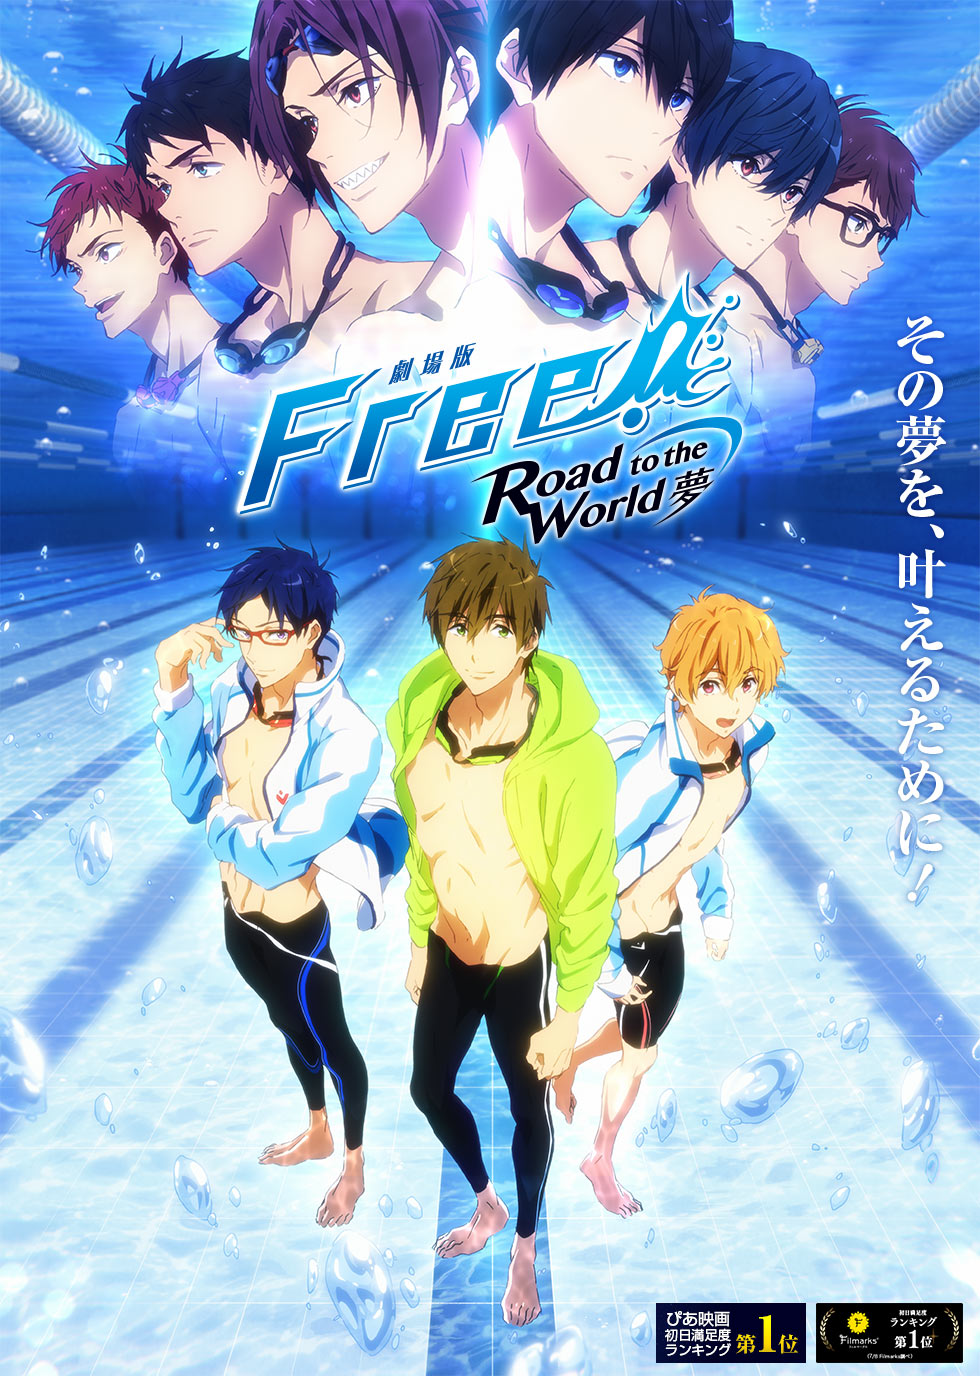 Free!-Road to the World-夢